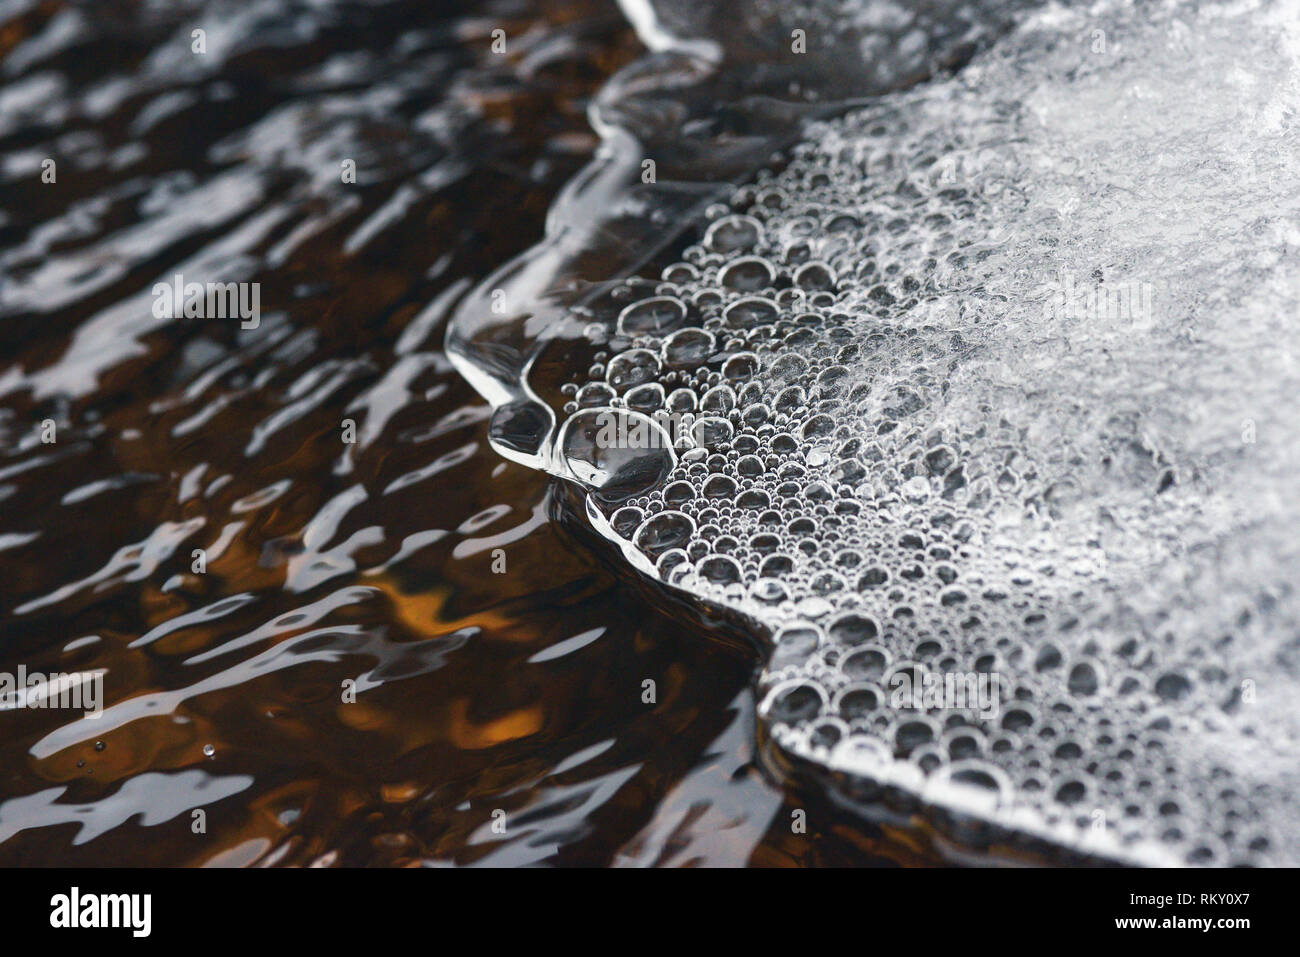 The accumulation of air bubbles under the thin crust of ice against the background of a turbulent flow of water. Stock Photo